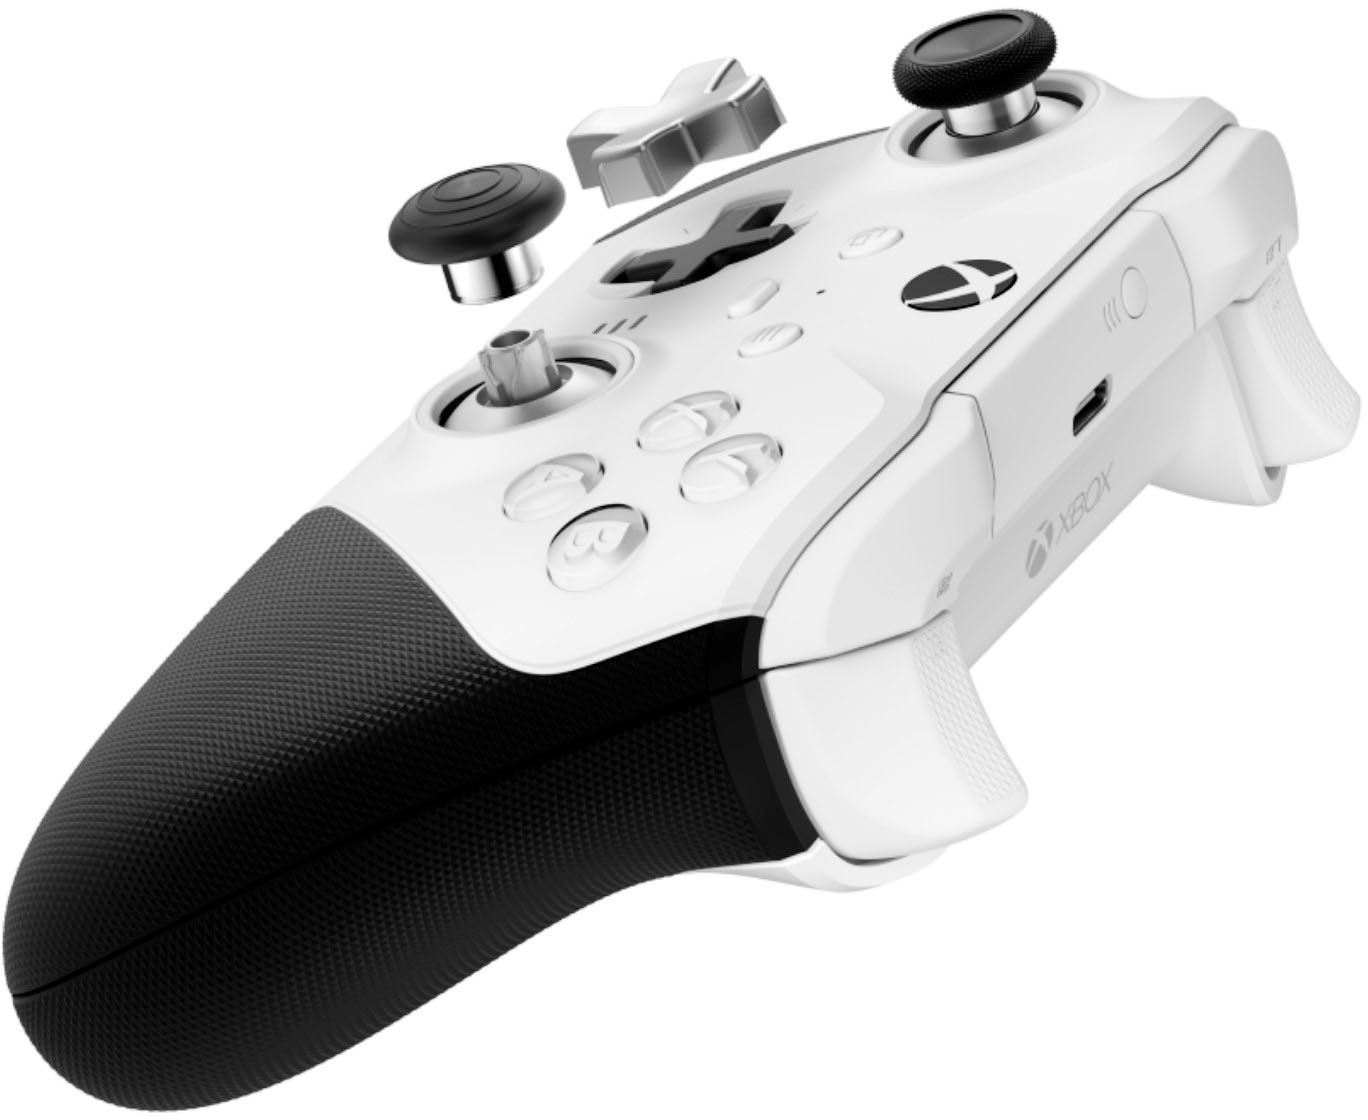 Officer Festival Samme Microsoft Elite Series 2 Core Wireless Controller for Xbox Series X, Xbox  Series S, Xbox One, and Windows PCs White 4IK-00001 - Best Buy